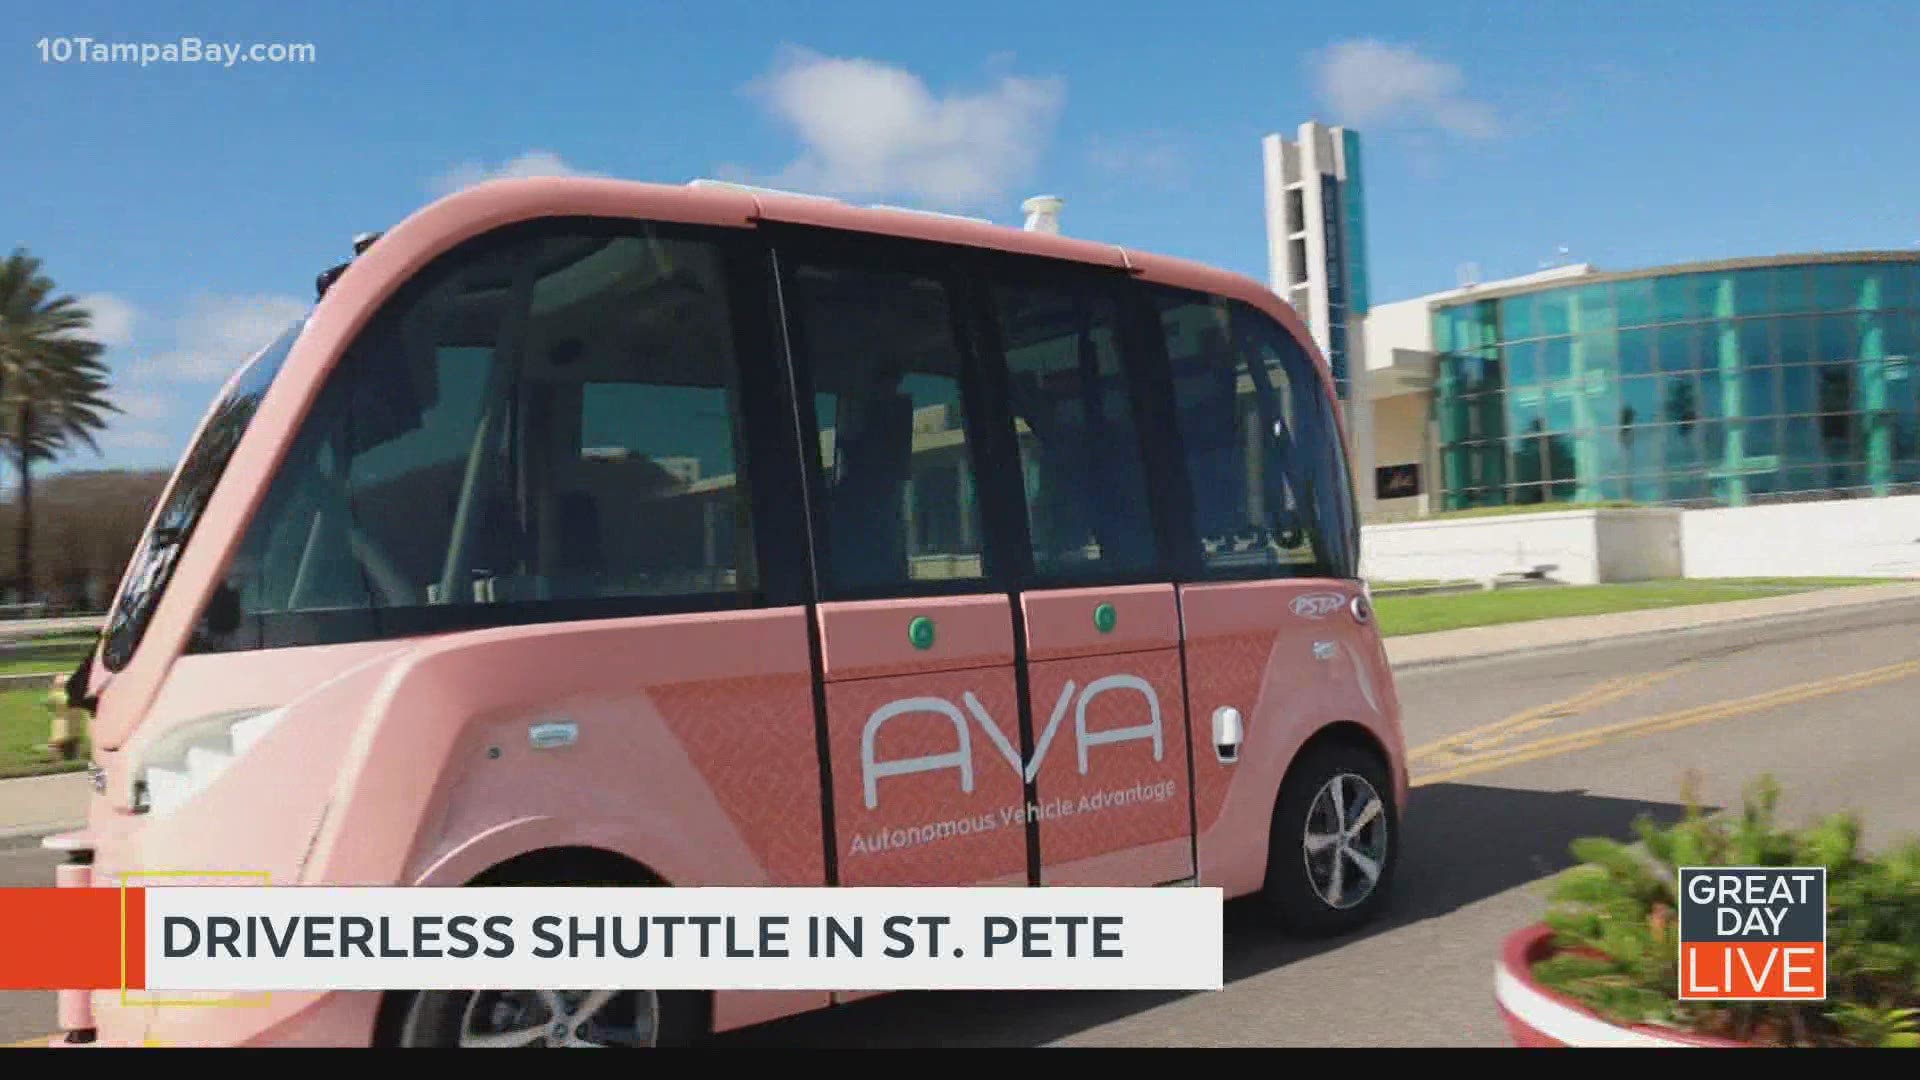 Take a ride on PSTA’s driverless shuttle